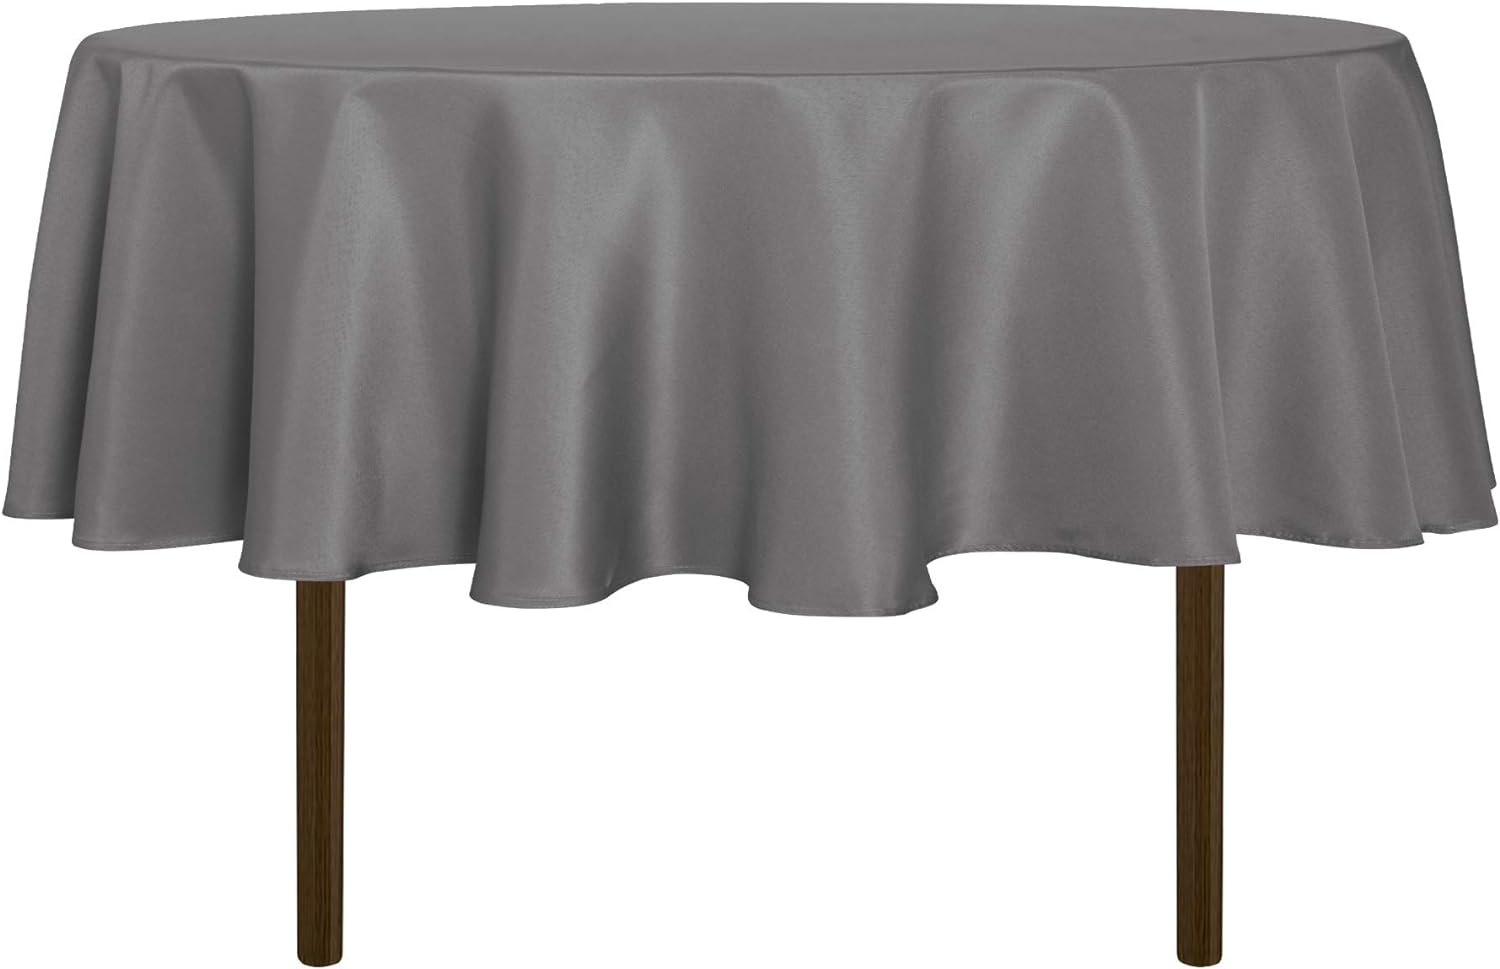 sancua Round Tablecloth - 60 Inch - Water Resistant Spill Proof Washable Polyester Table Cloth Decorative Fabric Table Cover for Dining Table, Buffet Parties and Camping, Light Grey